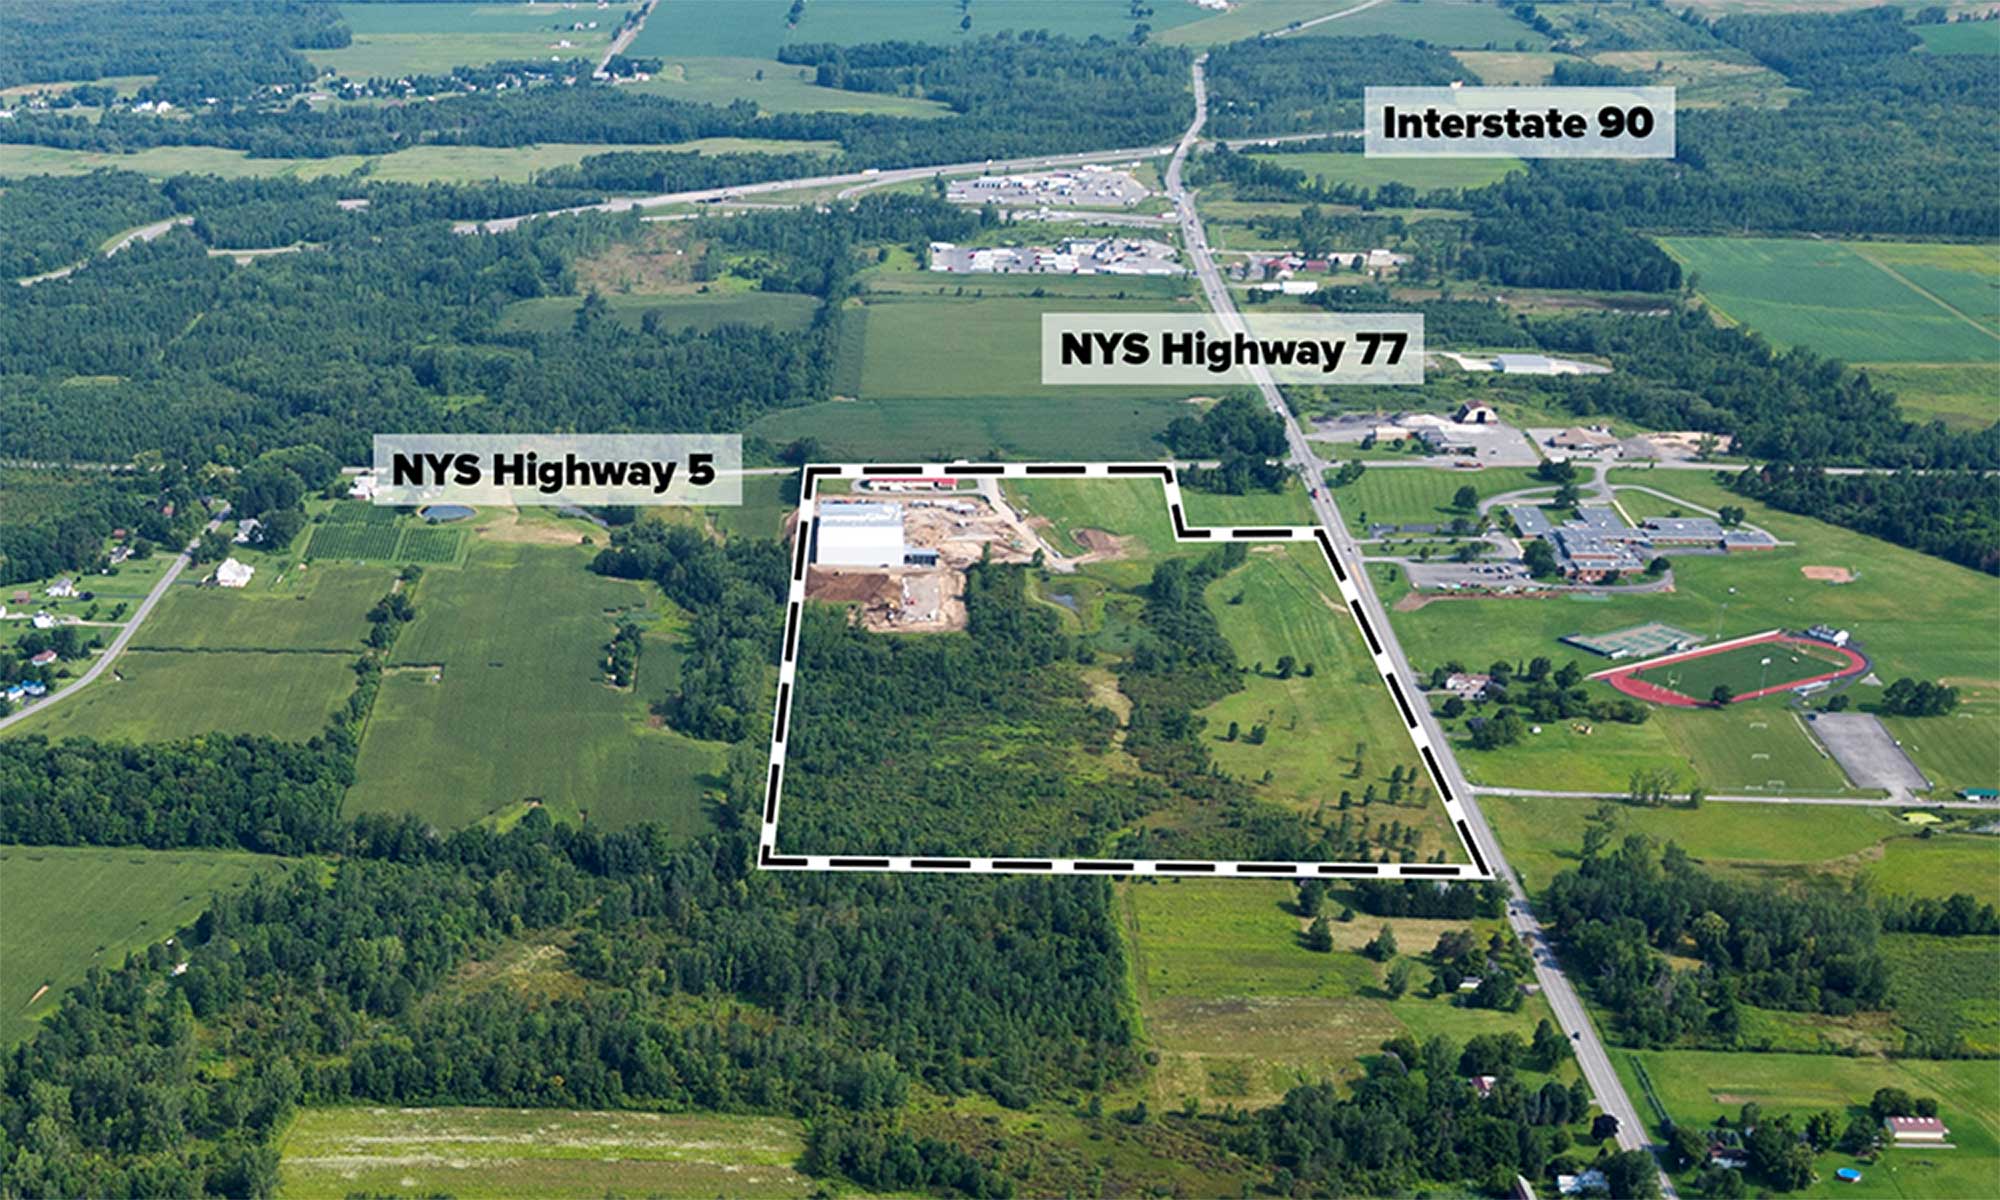 An aerial view of the Buffalo East Tech Park and transportation infrastructure in Pembroke, NY.